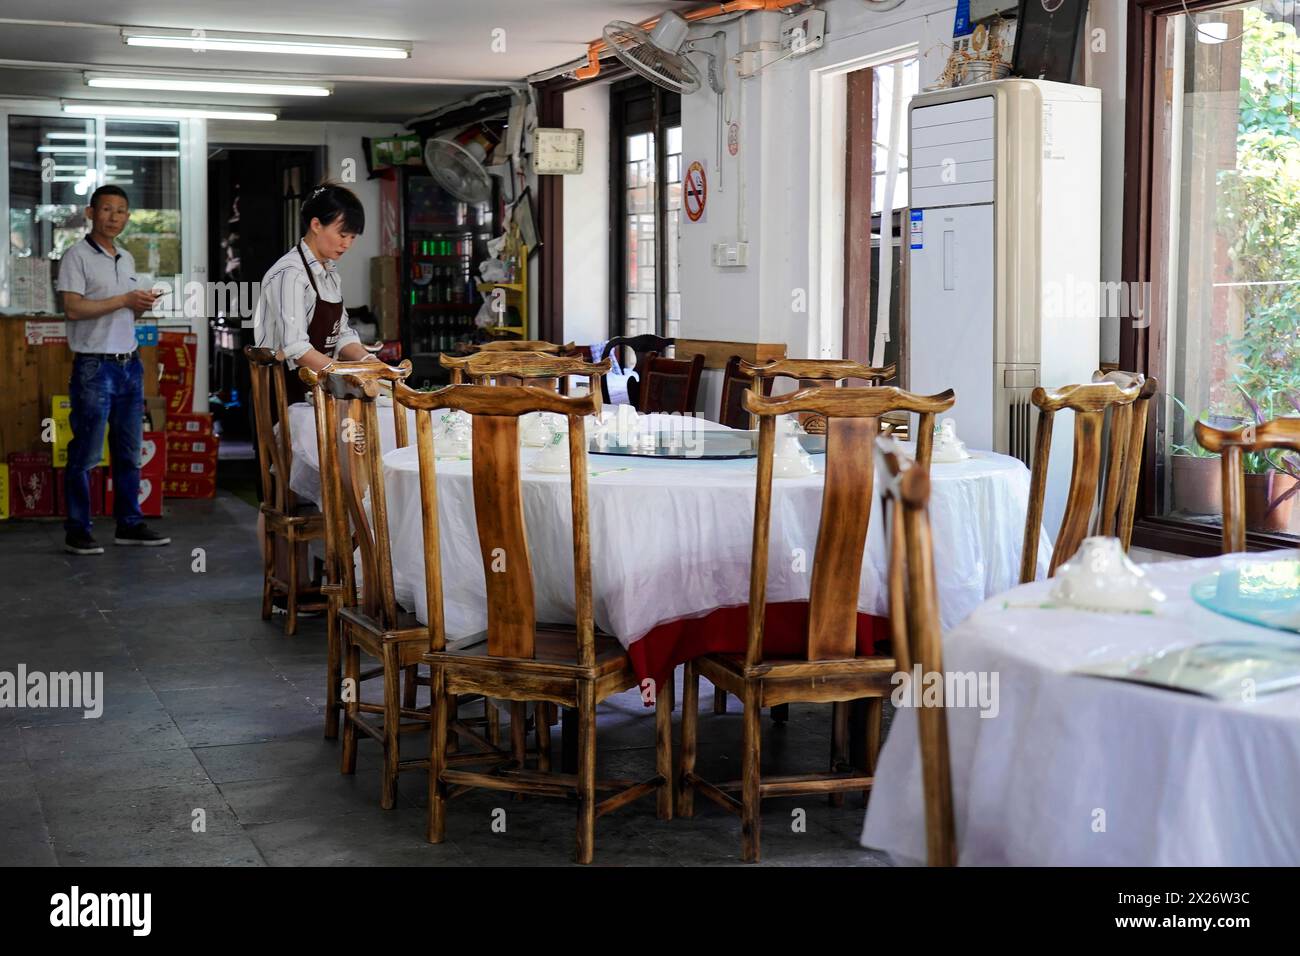 Excursion to Zhujiajiao Water Village, Shanghai, China, Asia, Empty restaurant with wooden tables and chairs and a visible employee Stock Photo